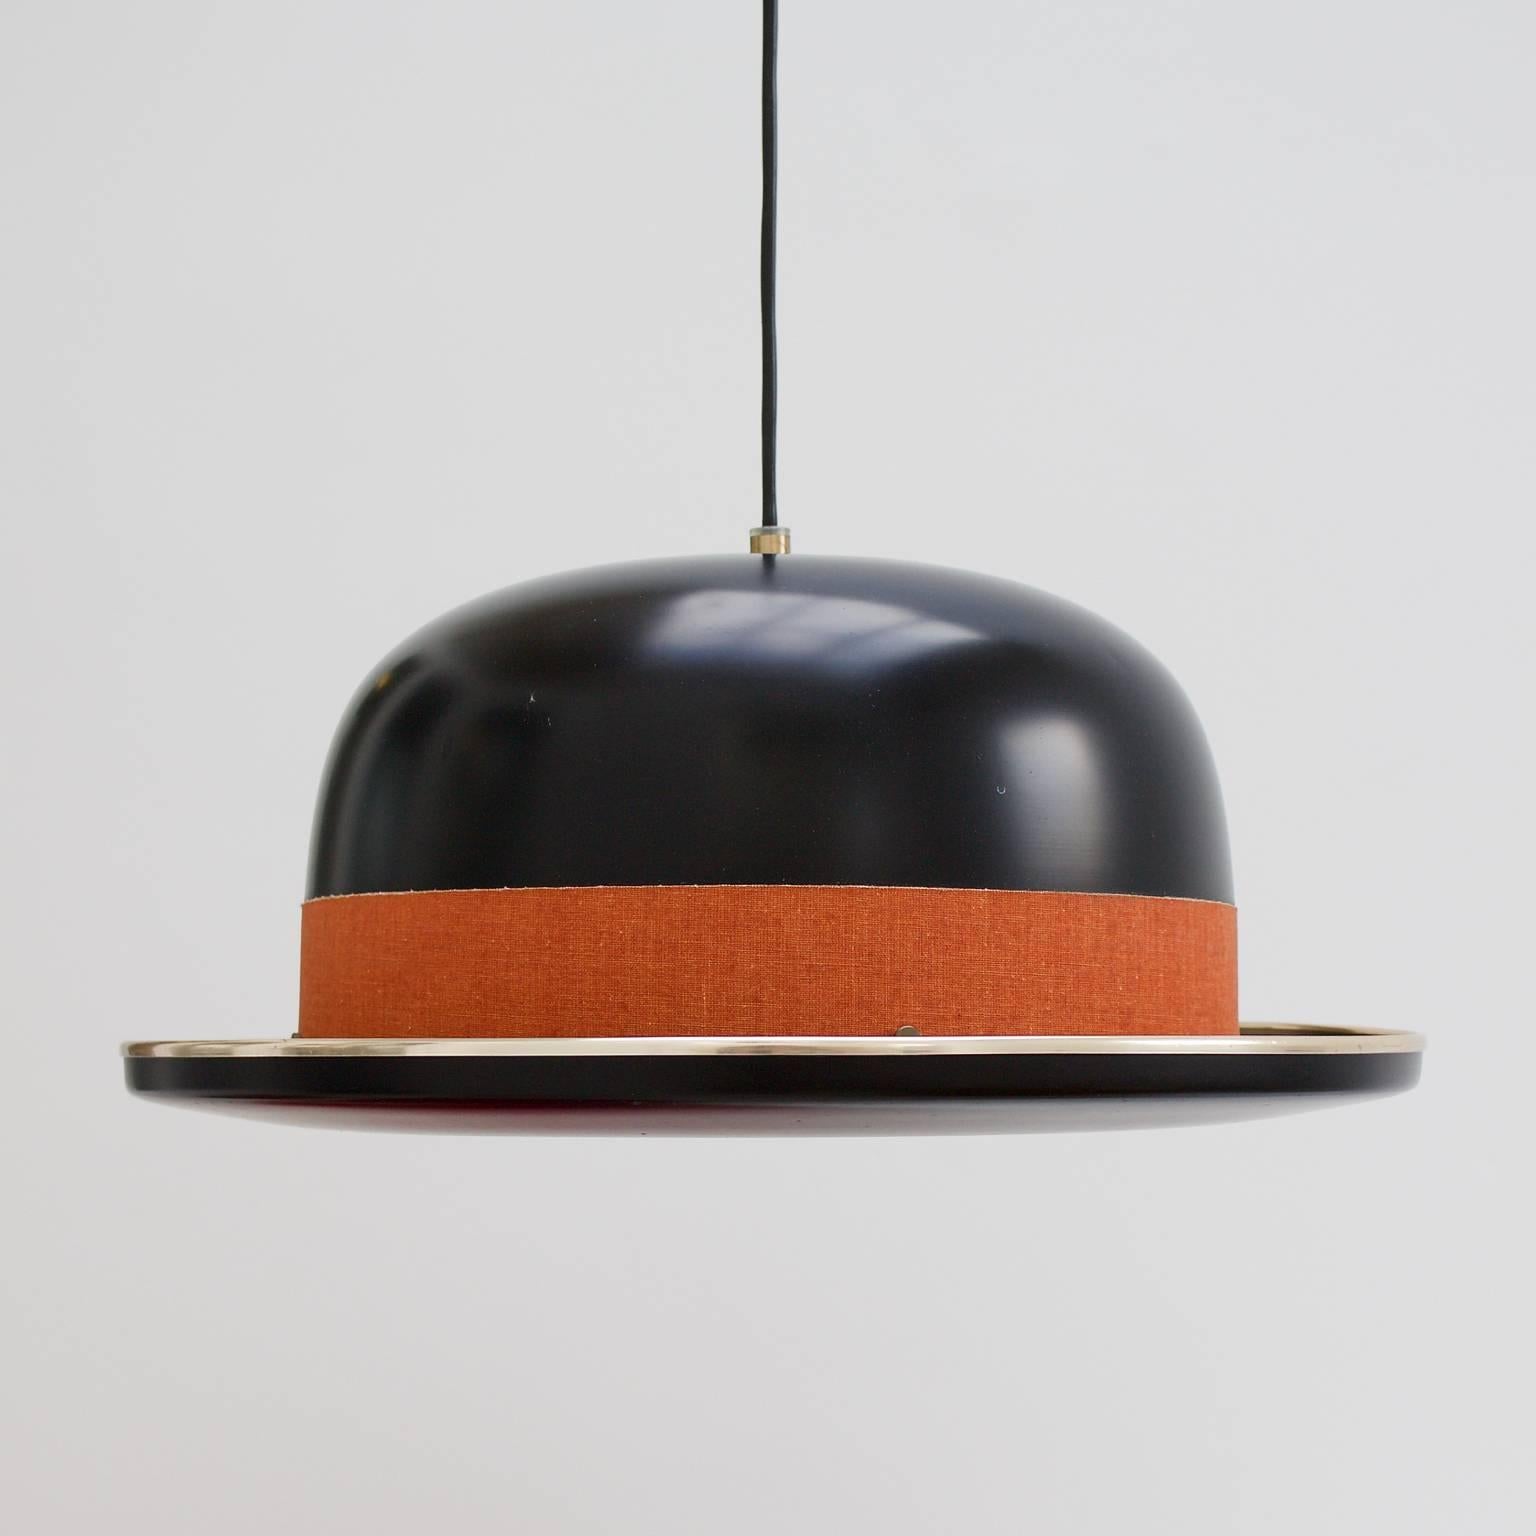 Bowler hat pendant lamp by Hans Agne Jakobsson for HAJ AB Markaryd, Sweden. Lacquered aluminium in black, with brass-plated trim, 1960s.

This unusual light has a surreal quality and is complete with its original linen hat band, in burnt orange, and